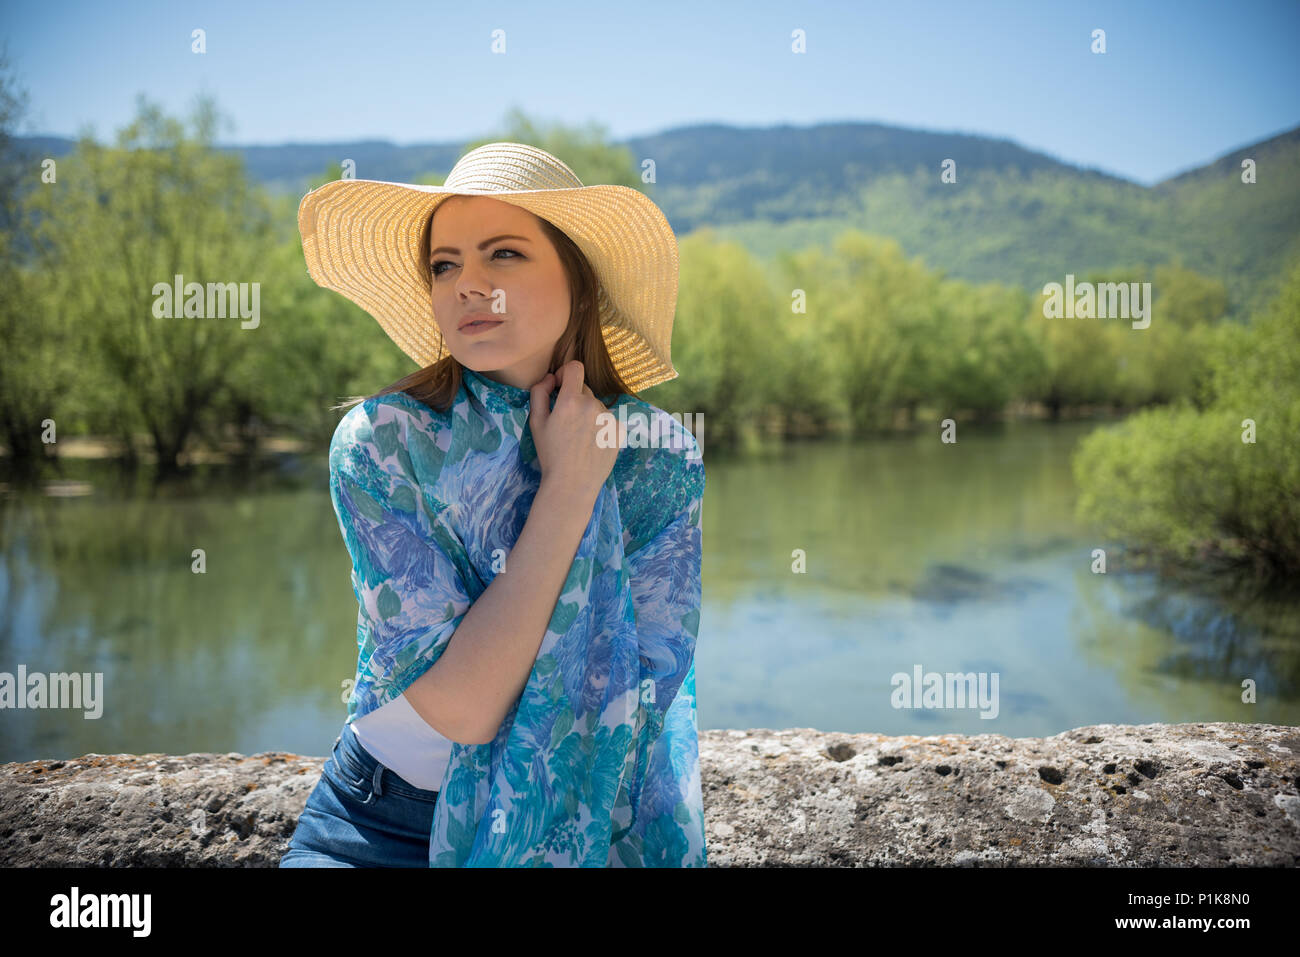 Portrait of a woman wearing a sunhat sitting by a river Stock Photo